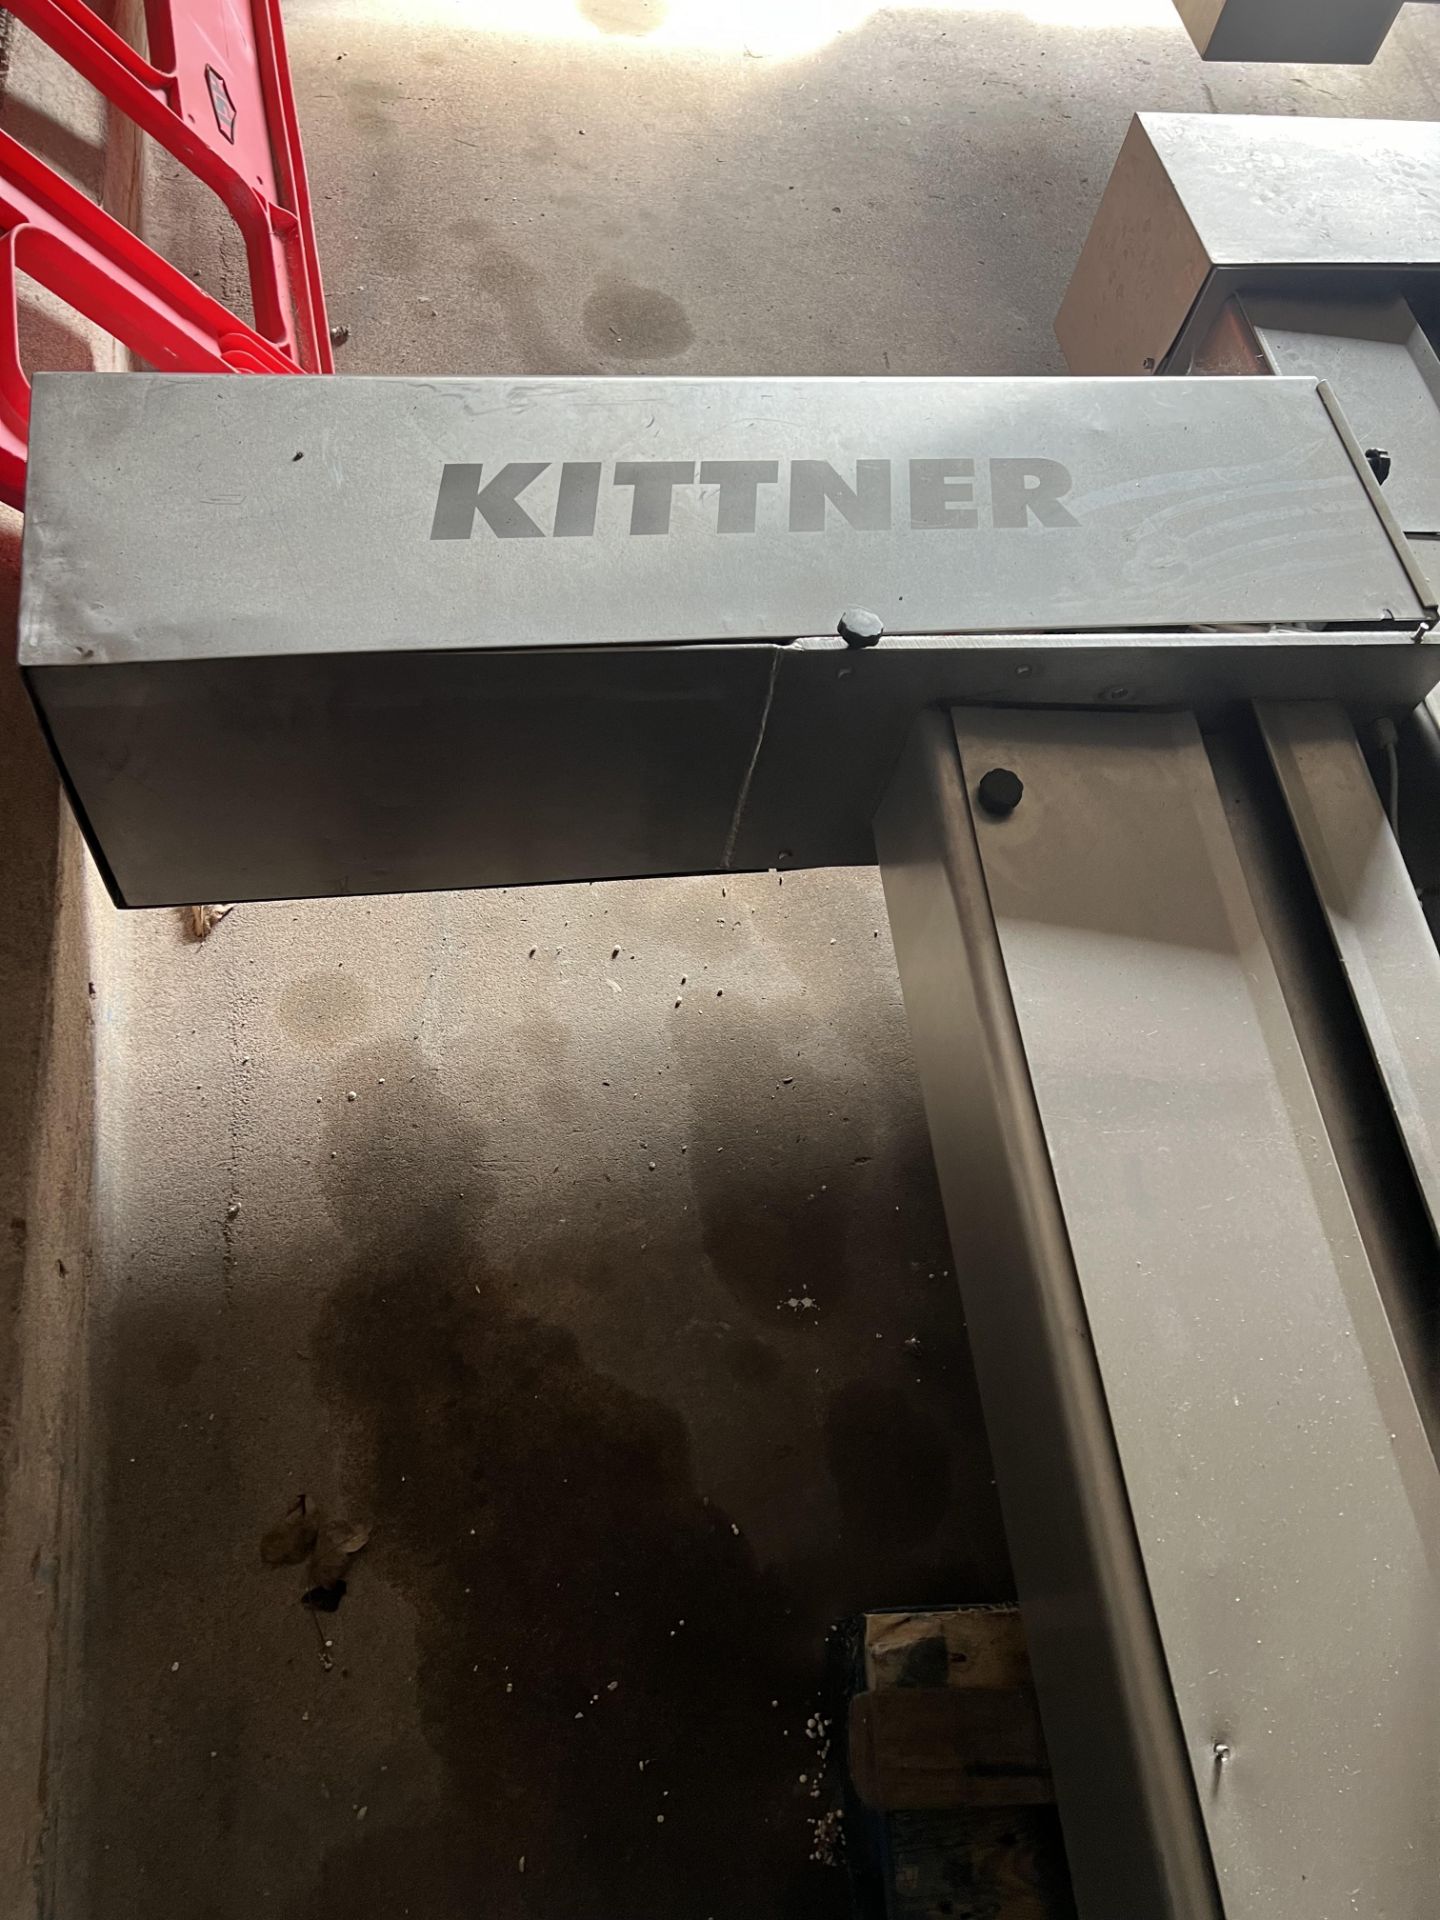 Kittner KHV30-20 Tote Bin Hoist/ Tipper, tips at approx. 2m, 3m high x 1m wide overall, lift out - Image 4 of 5